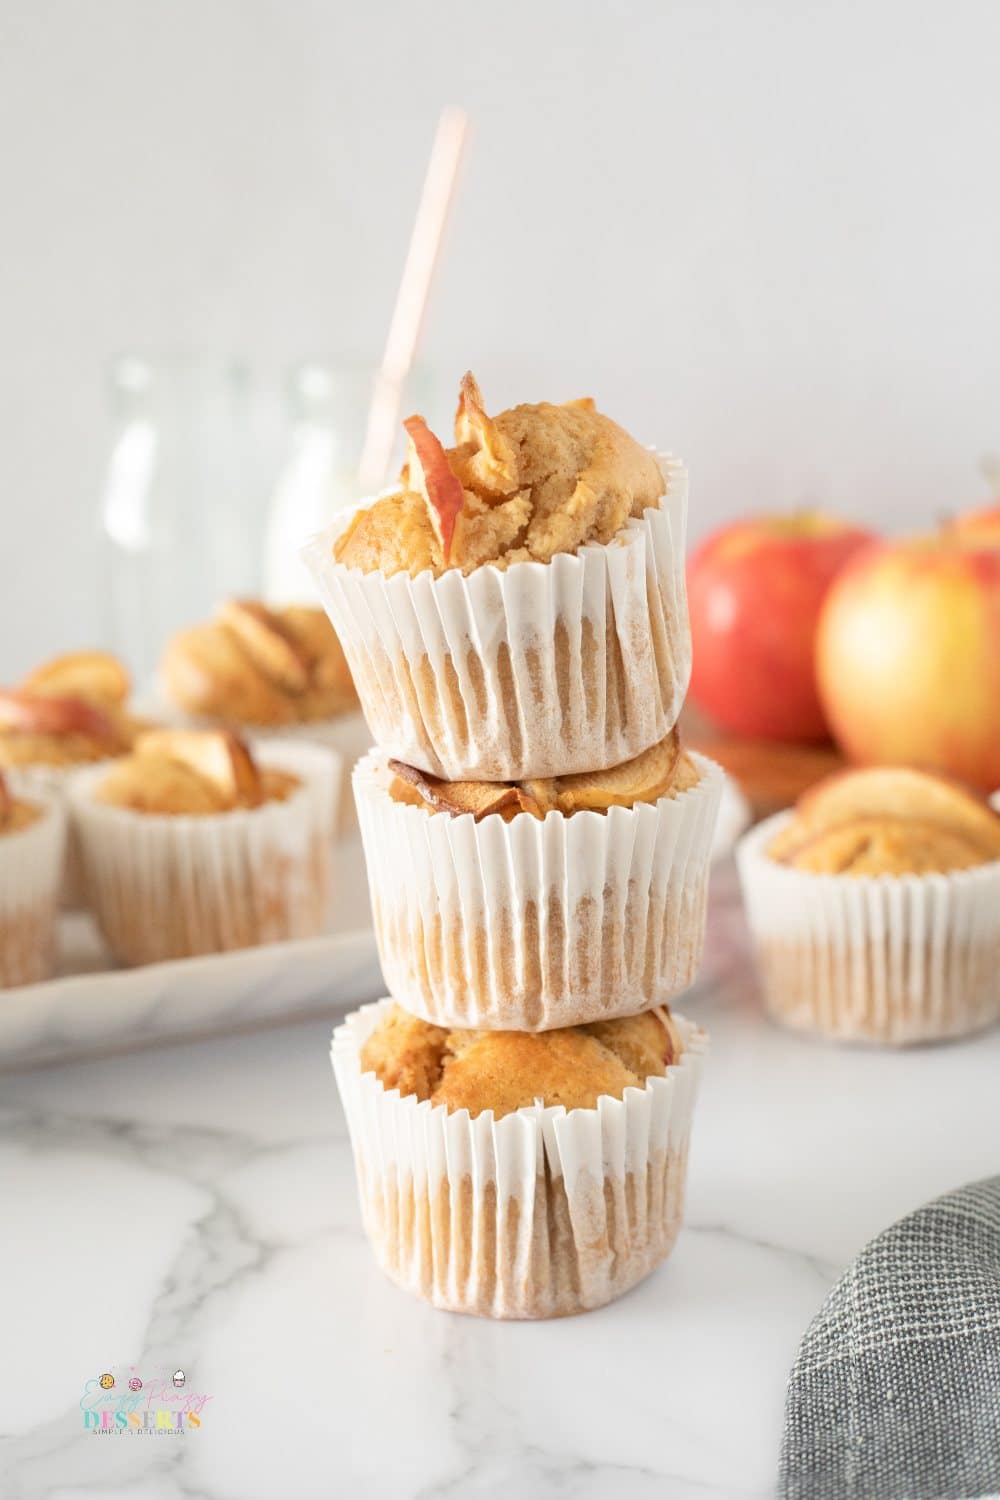 A stack of apple and cinnamon muffins